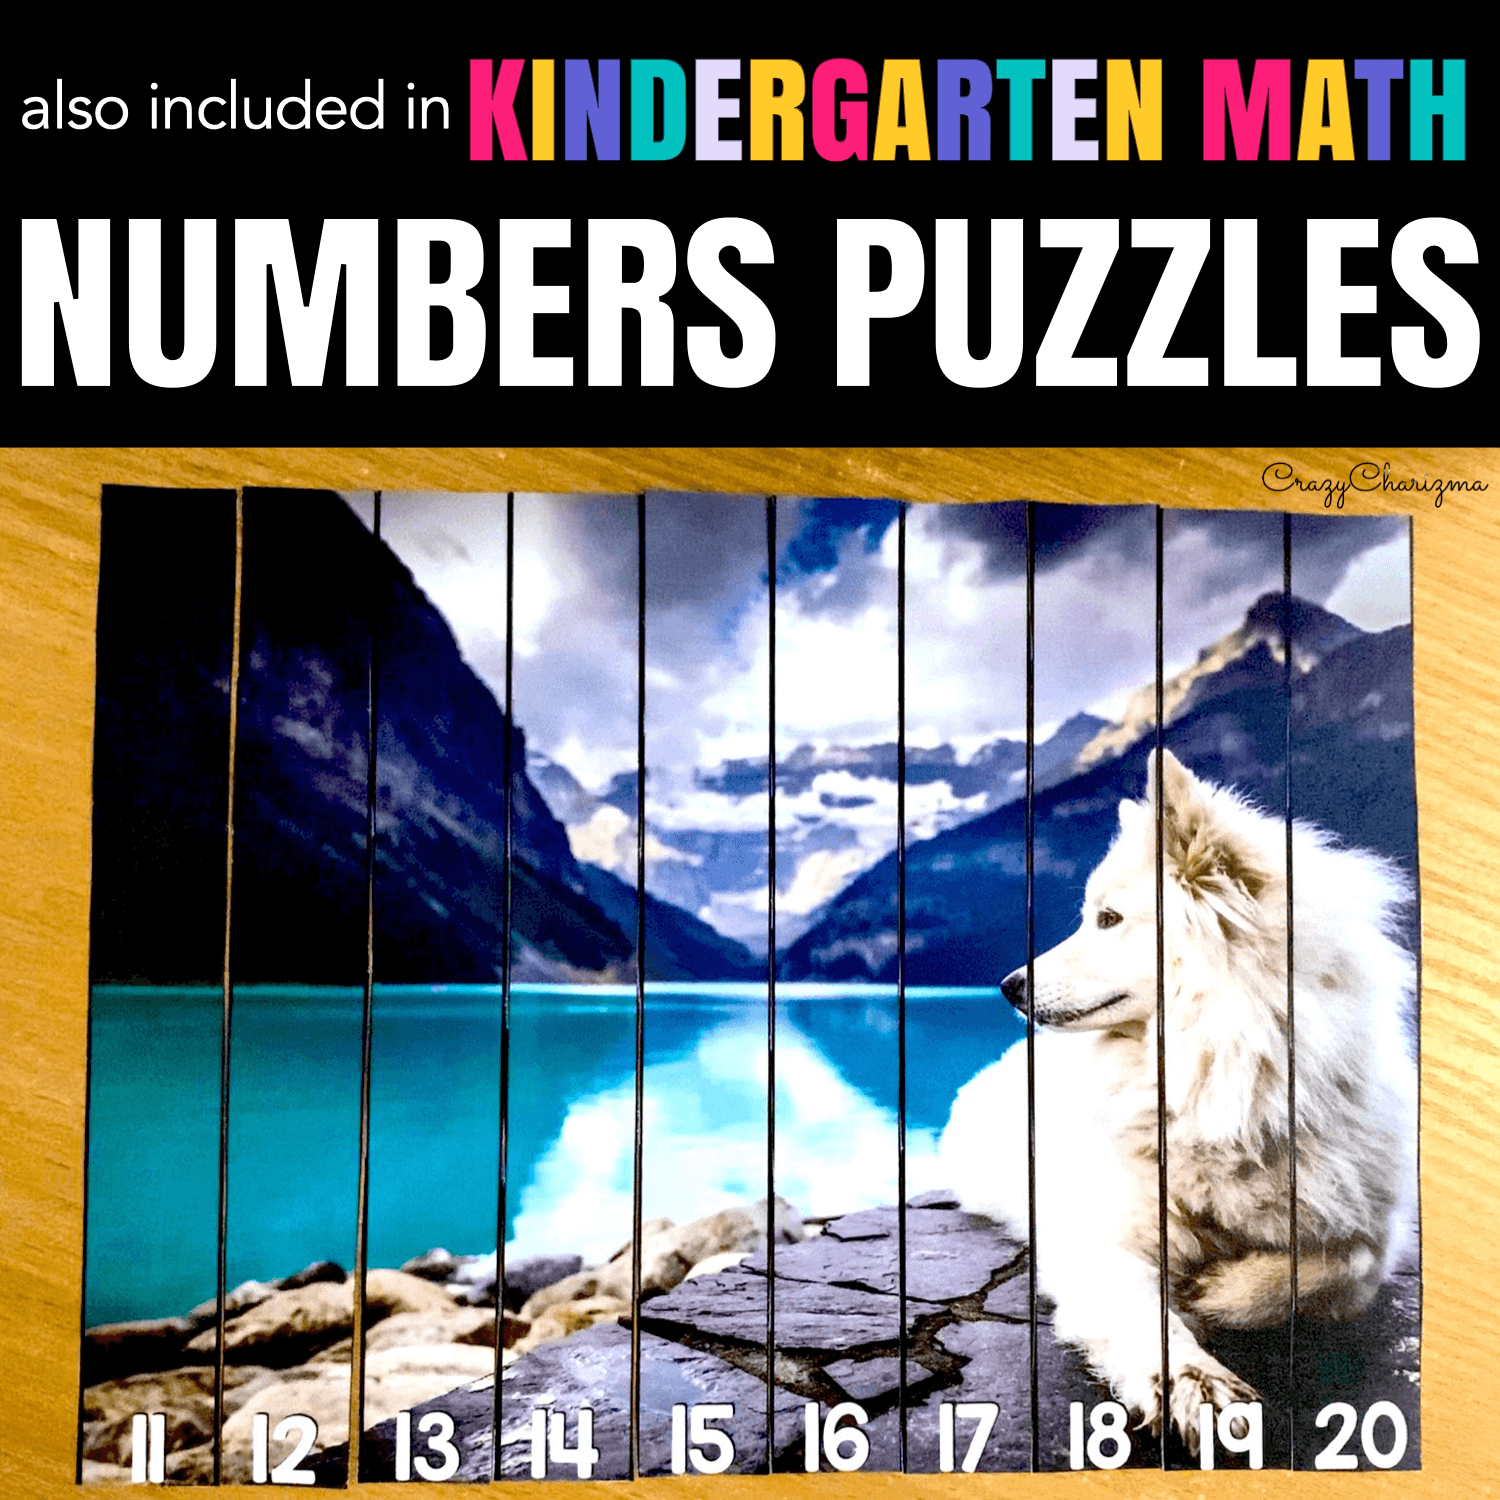 Practice counting on and backwards with these bright puzzles (kids will get real photos of animals after they complete each puzzle). This is an engaging way for your students to work on recognizing numbers and putting them in order. There are 40 puzzles inside. The puzzles included are 1-10, 11-20, 10-20, and counting by 10's to 100.